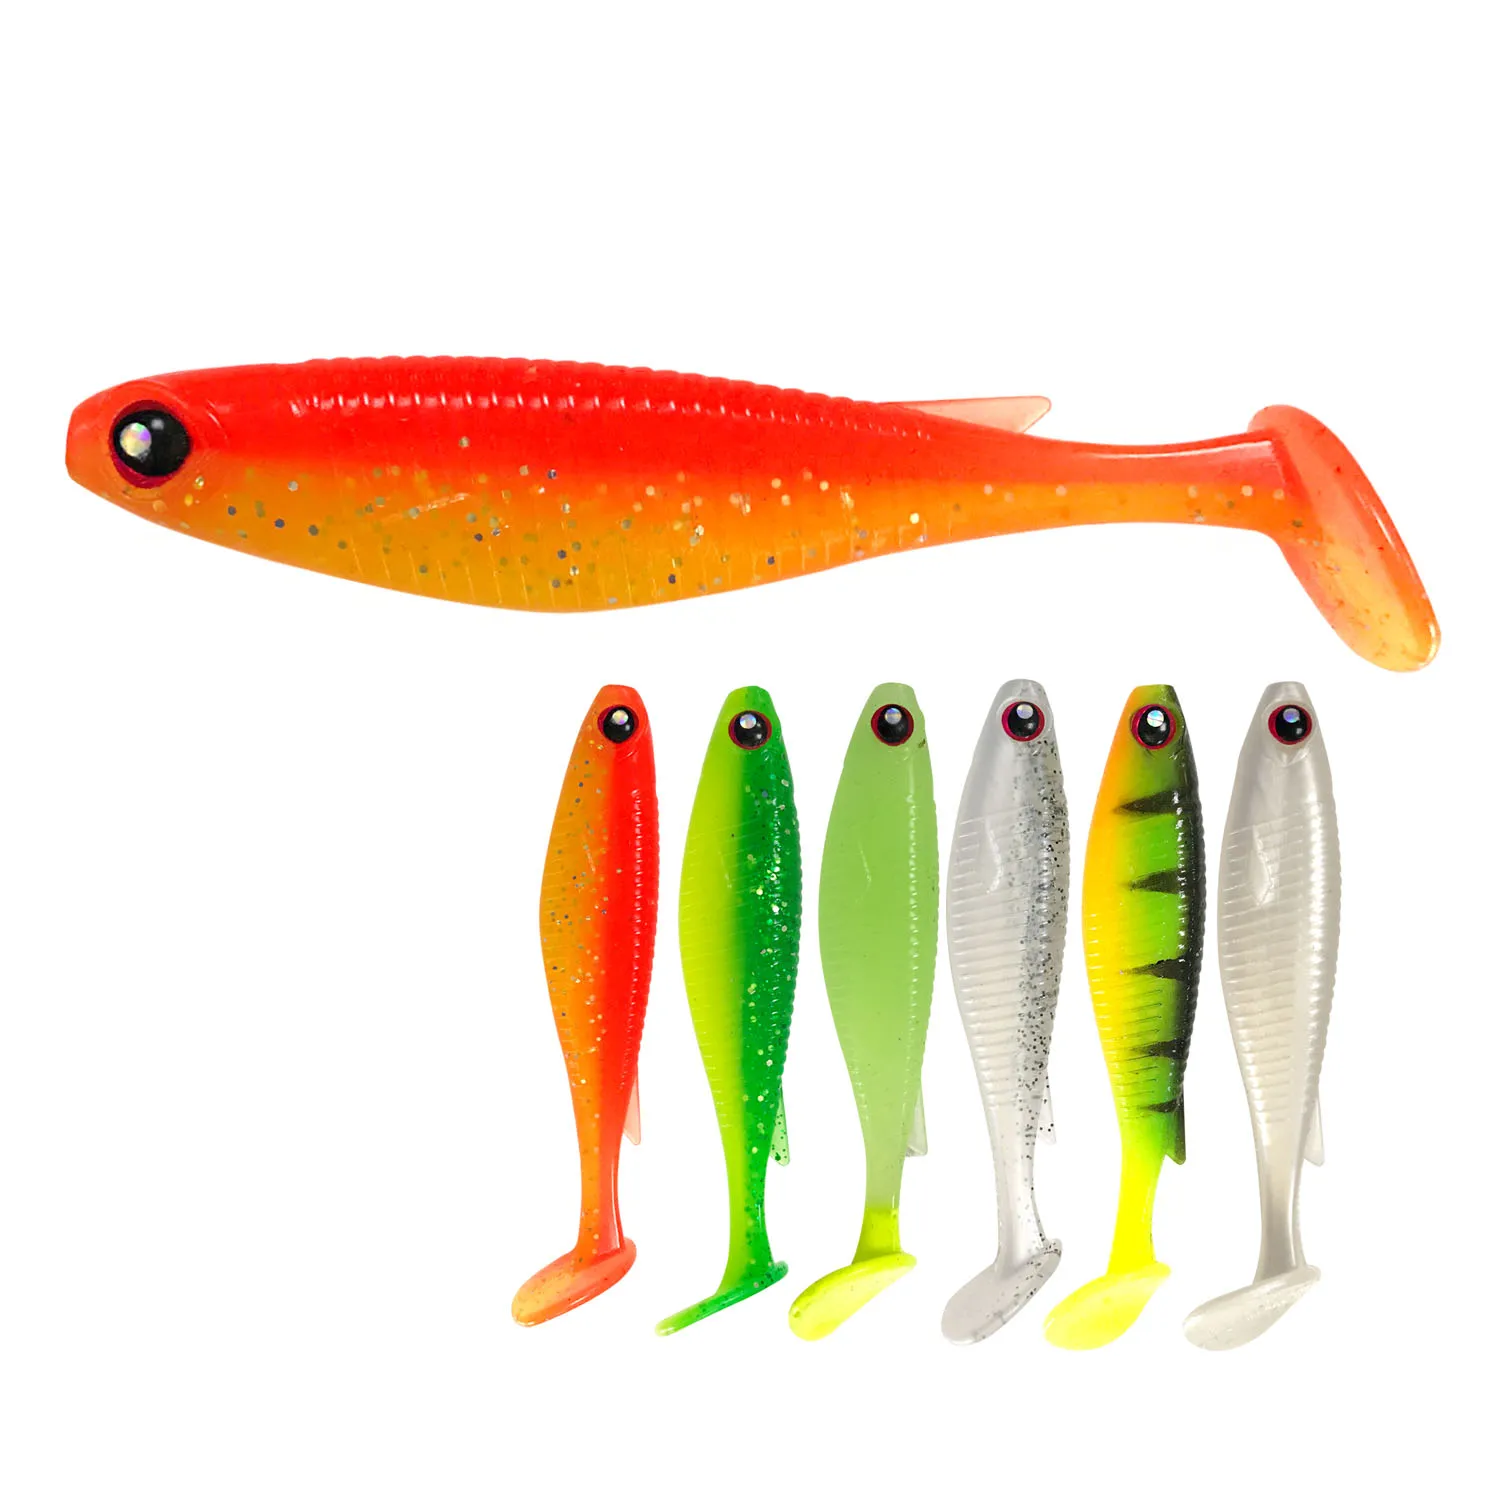 

AFISHLURE Soft Bait 100mm 8.2g 4pcs Fishing Lures Shad Swim baits Artificial paddle tail lure soft shad lure, 6 colors